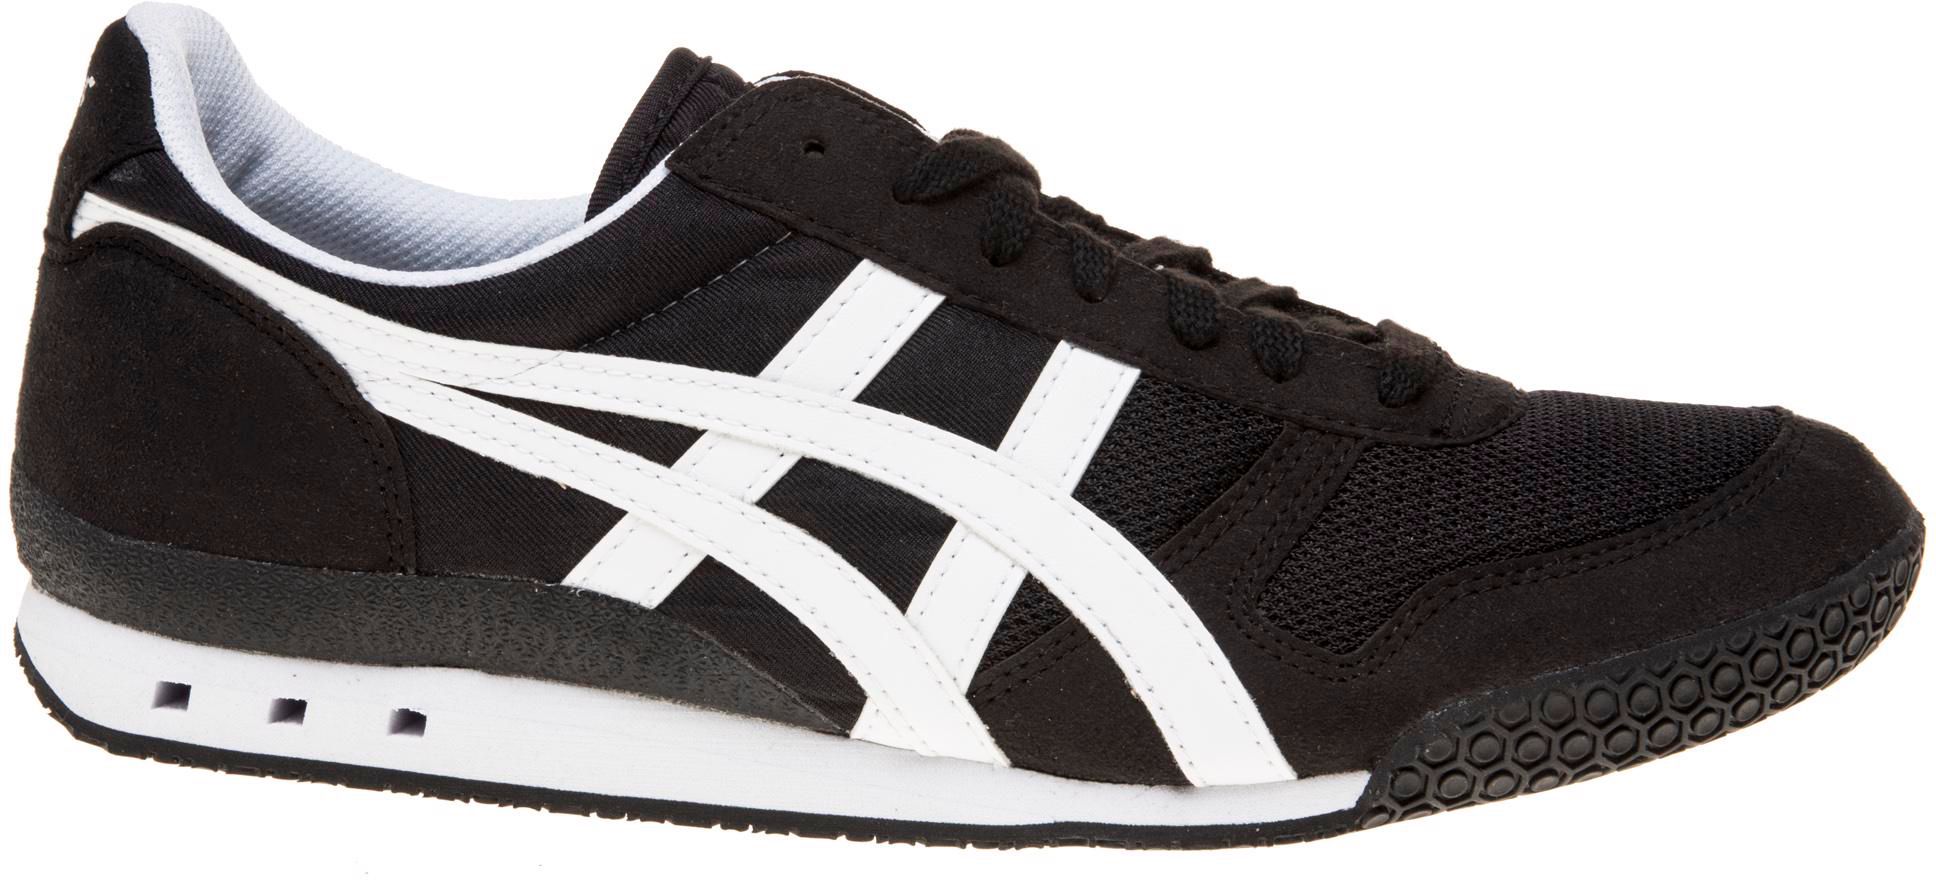 Mens Onitsuka Tiger Ultimate 81 Sneakers In Black/White | Soletrader